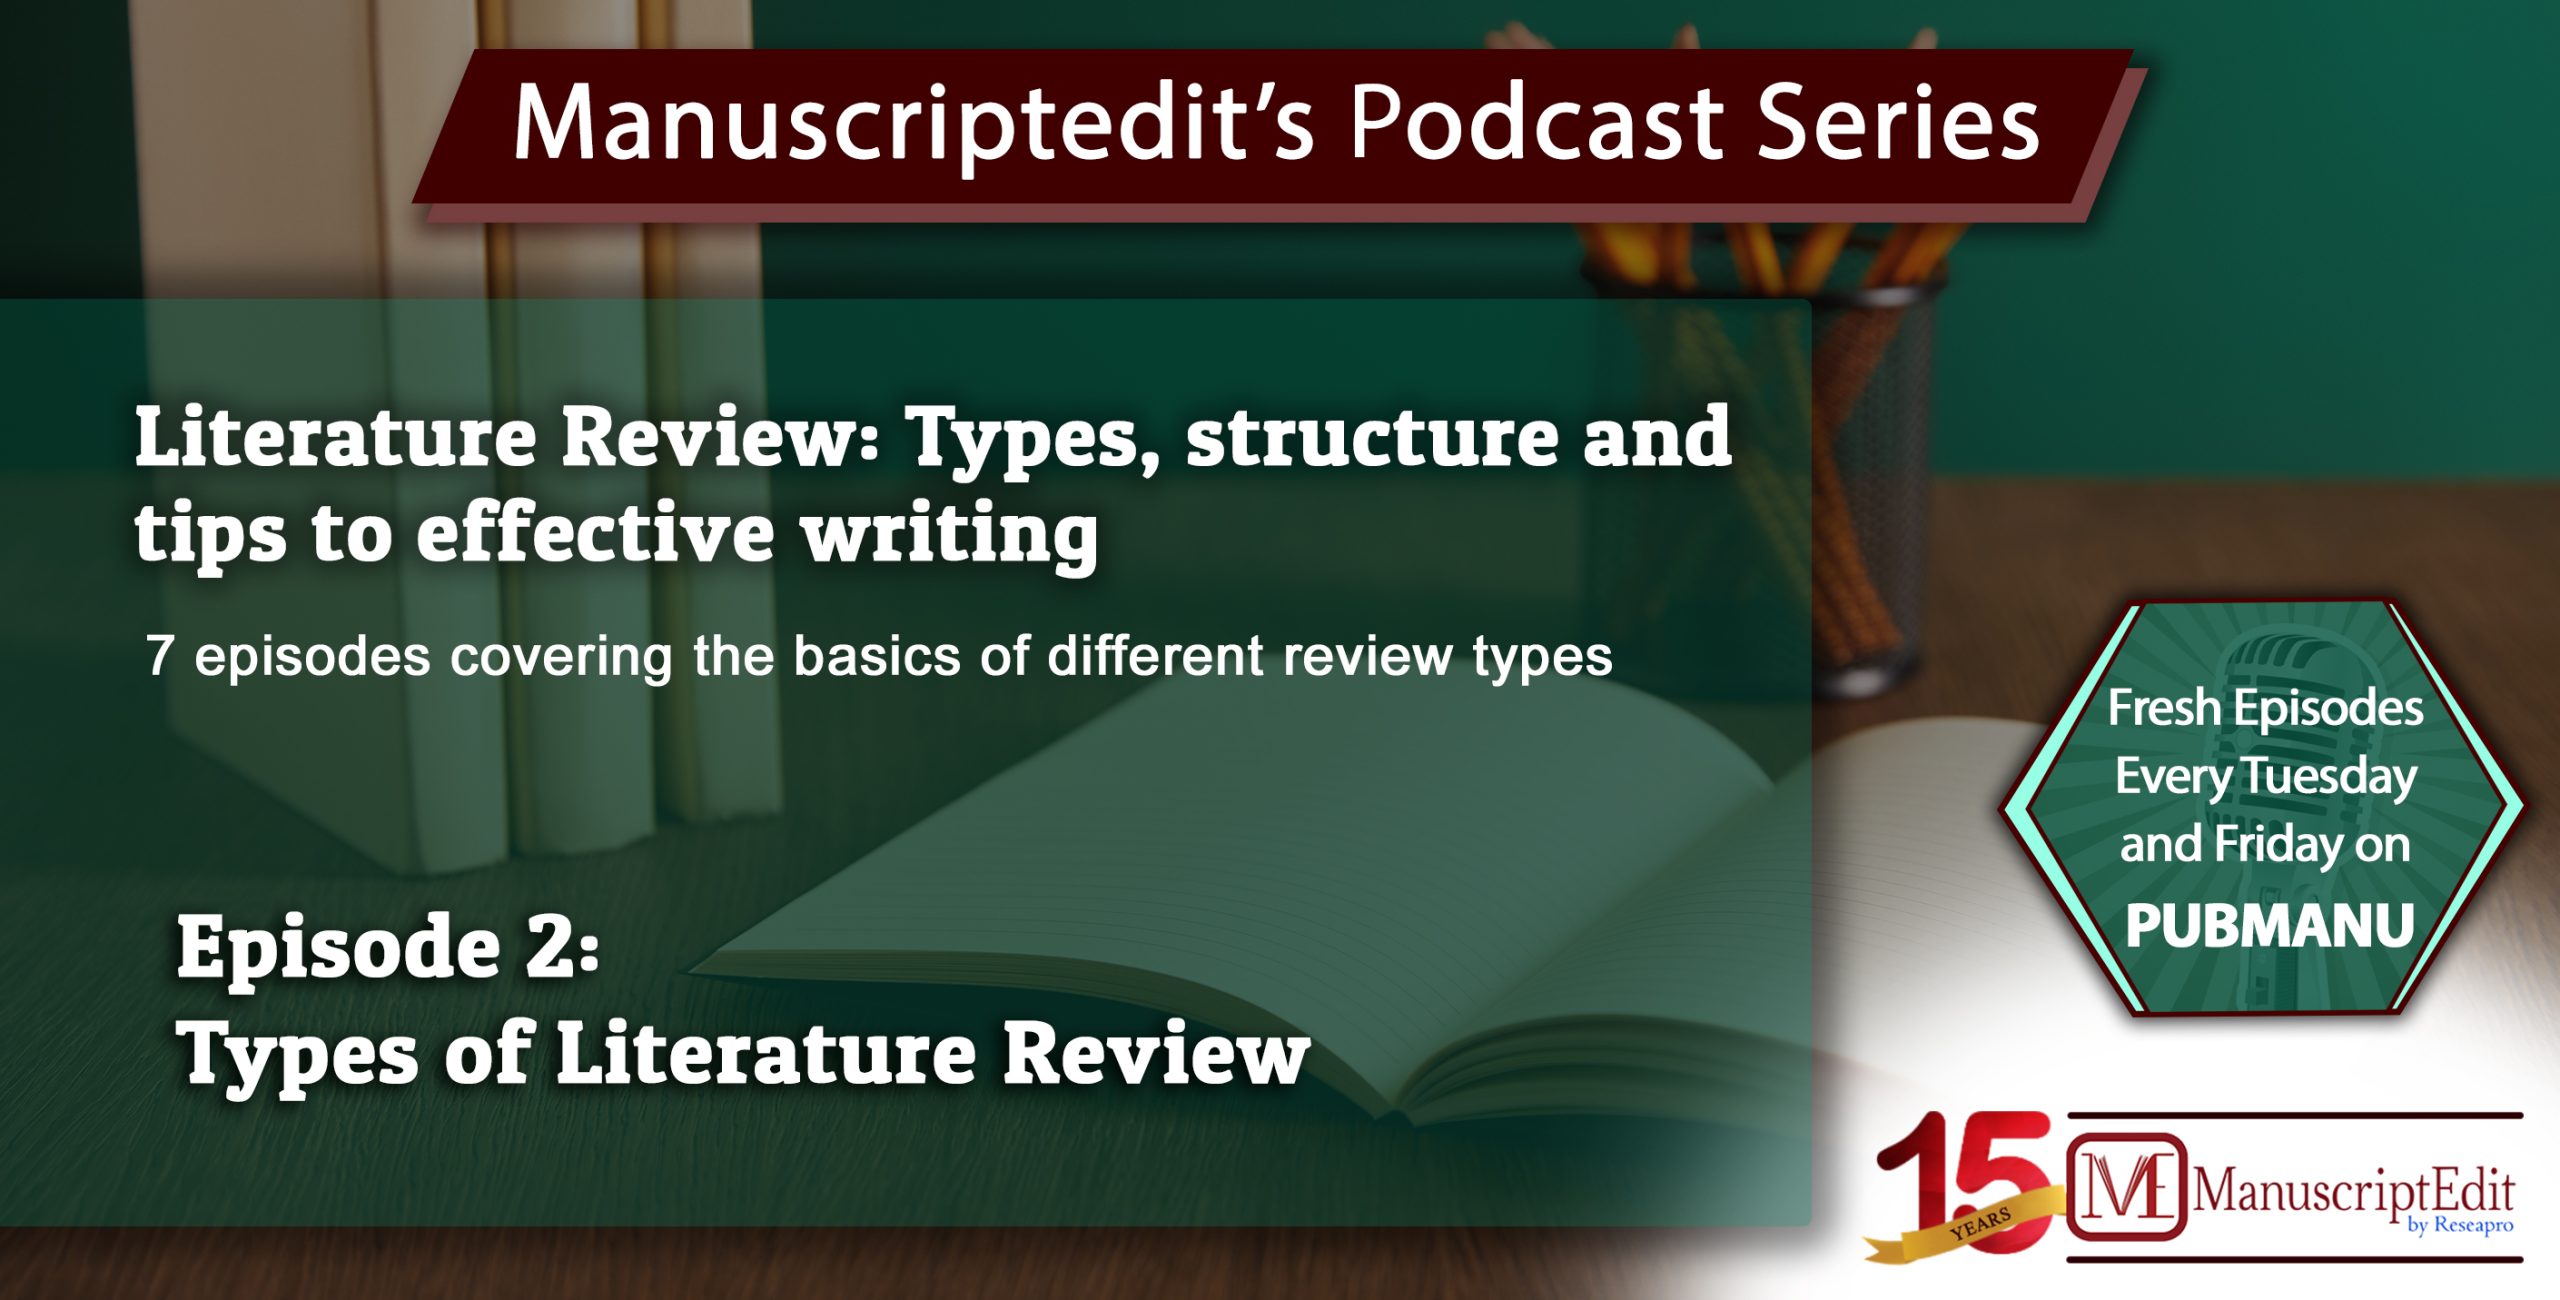 Episode- 2 Types of Literature Review